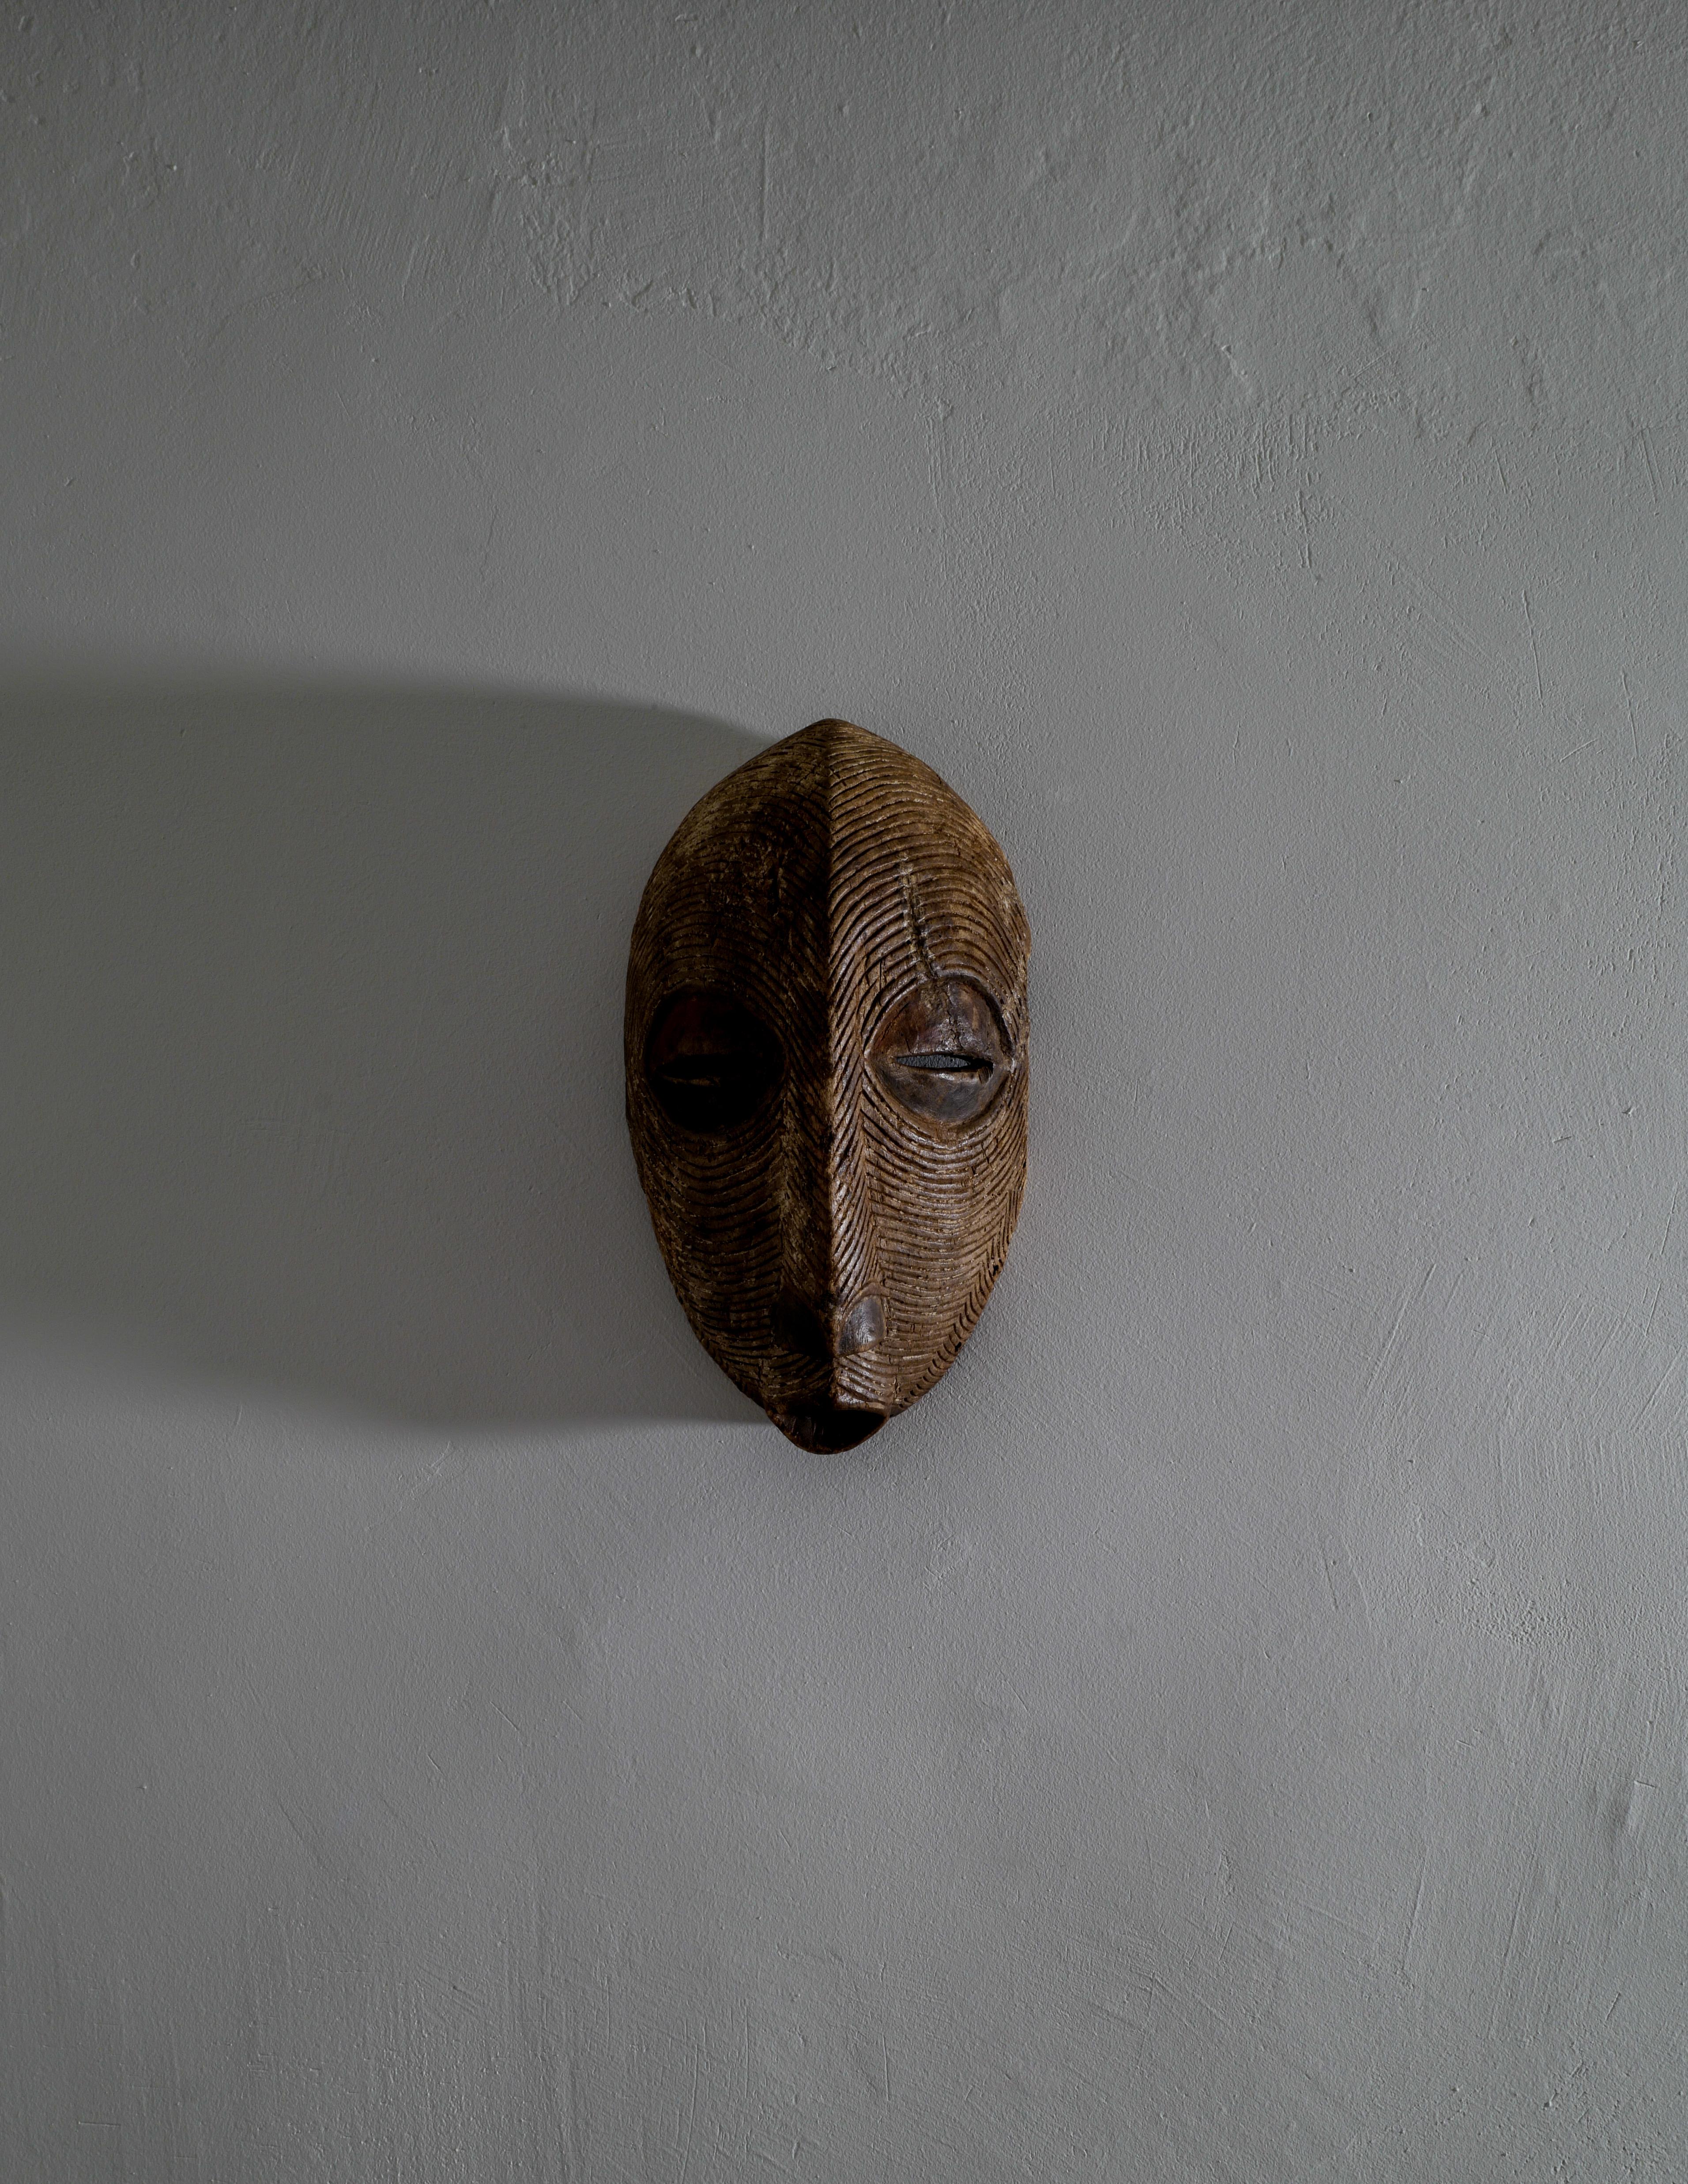 Rare tribal mask from Kenya, Africa and most likely produced in the early 1900s. In good vintage condition and showing patina from age and use. Hand carved, very beautiful and genuine.